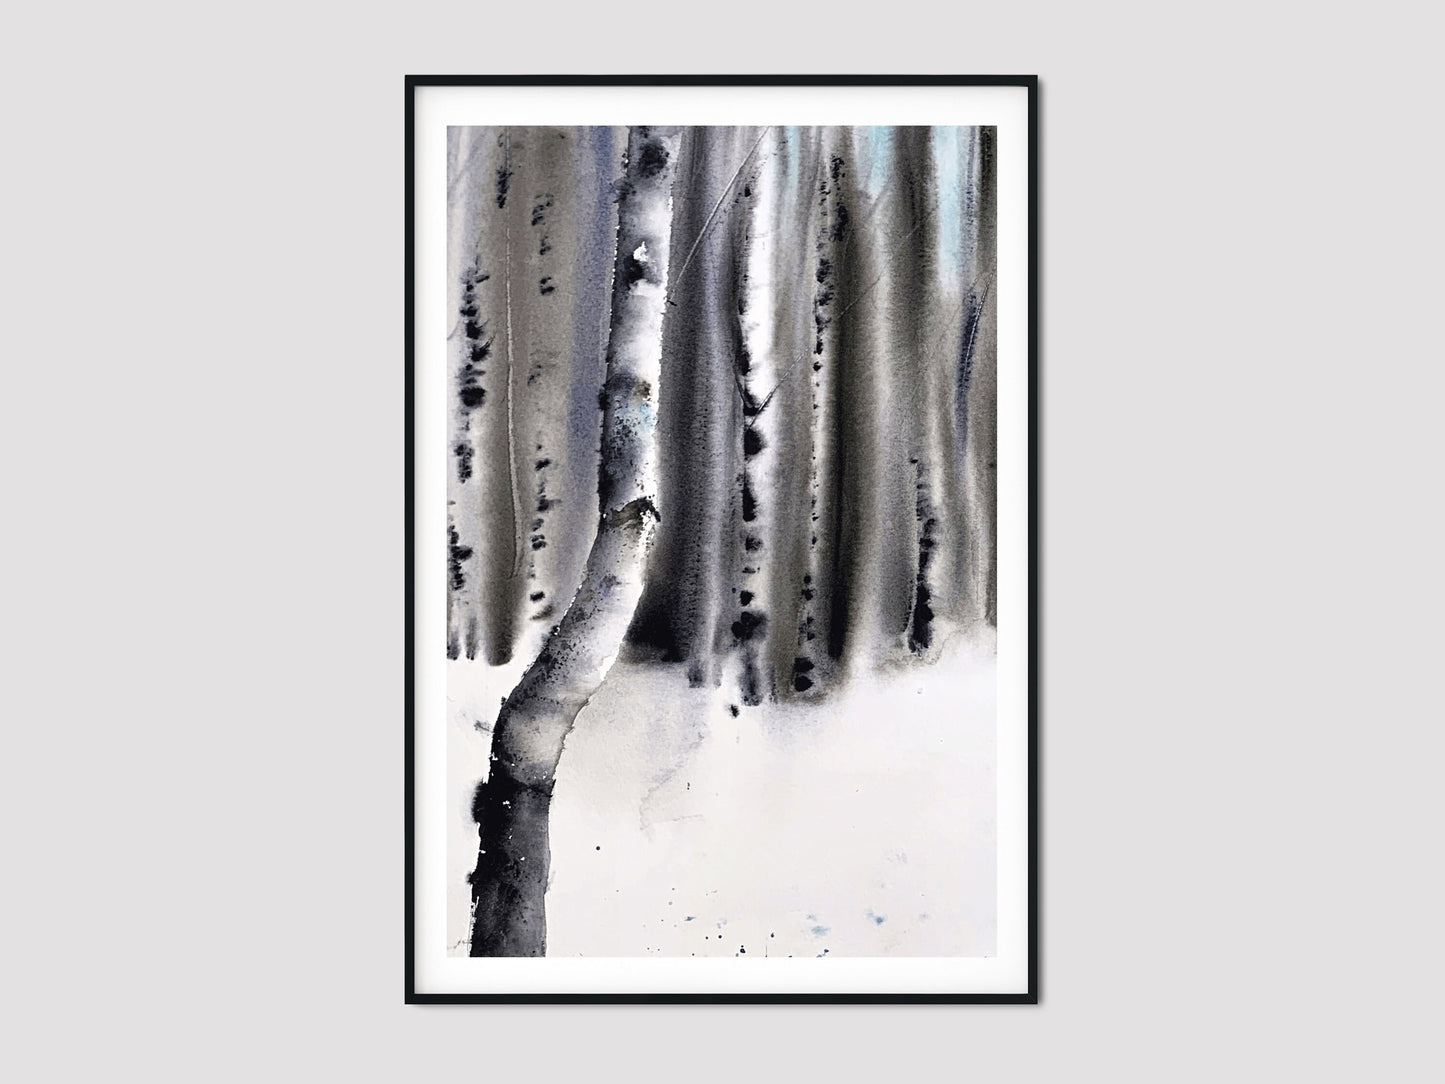 Birch Trees Prints Set of 3, Abstract Forest Wall Art, Nature Watercolor Paintings, Landscape Living Wall Decor